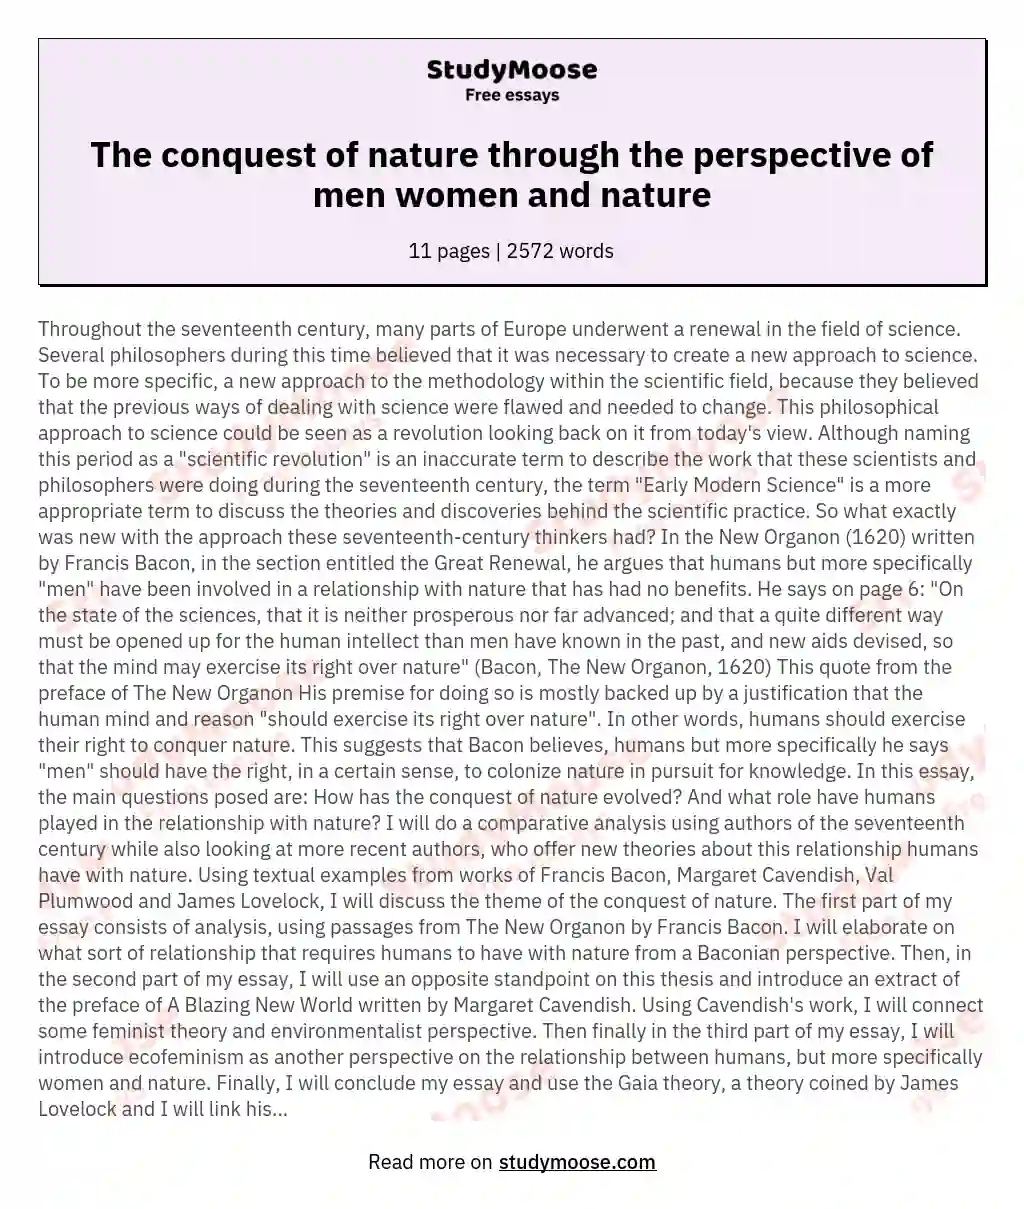 The conquest of nature through the perspective of men women and nature